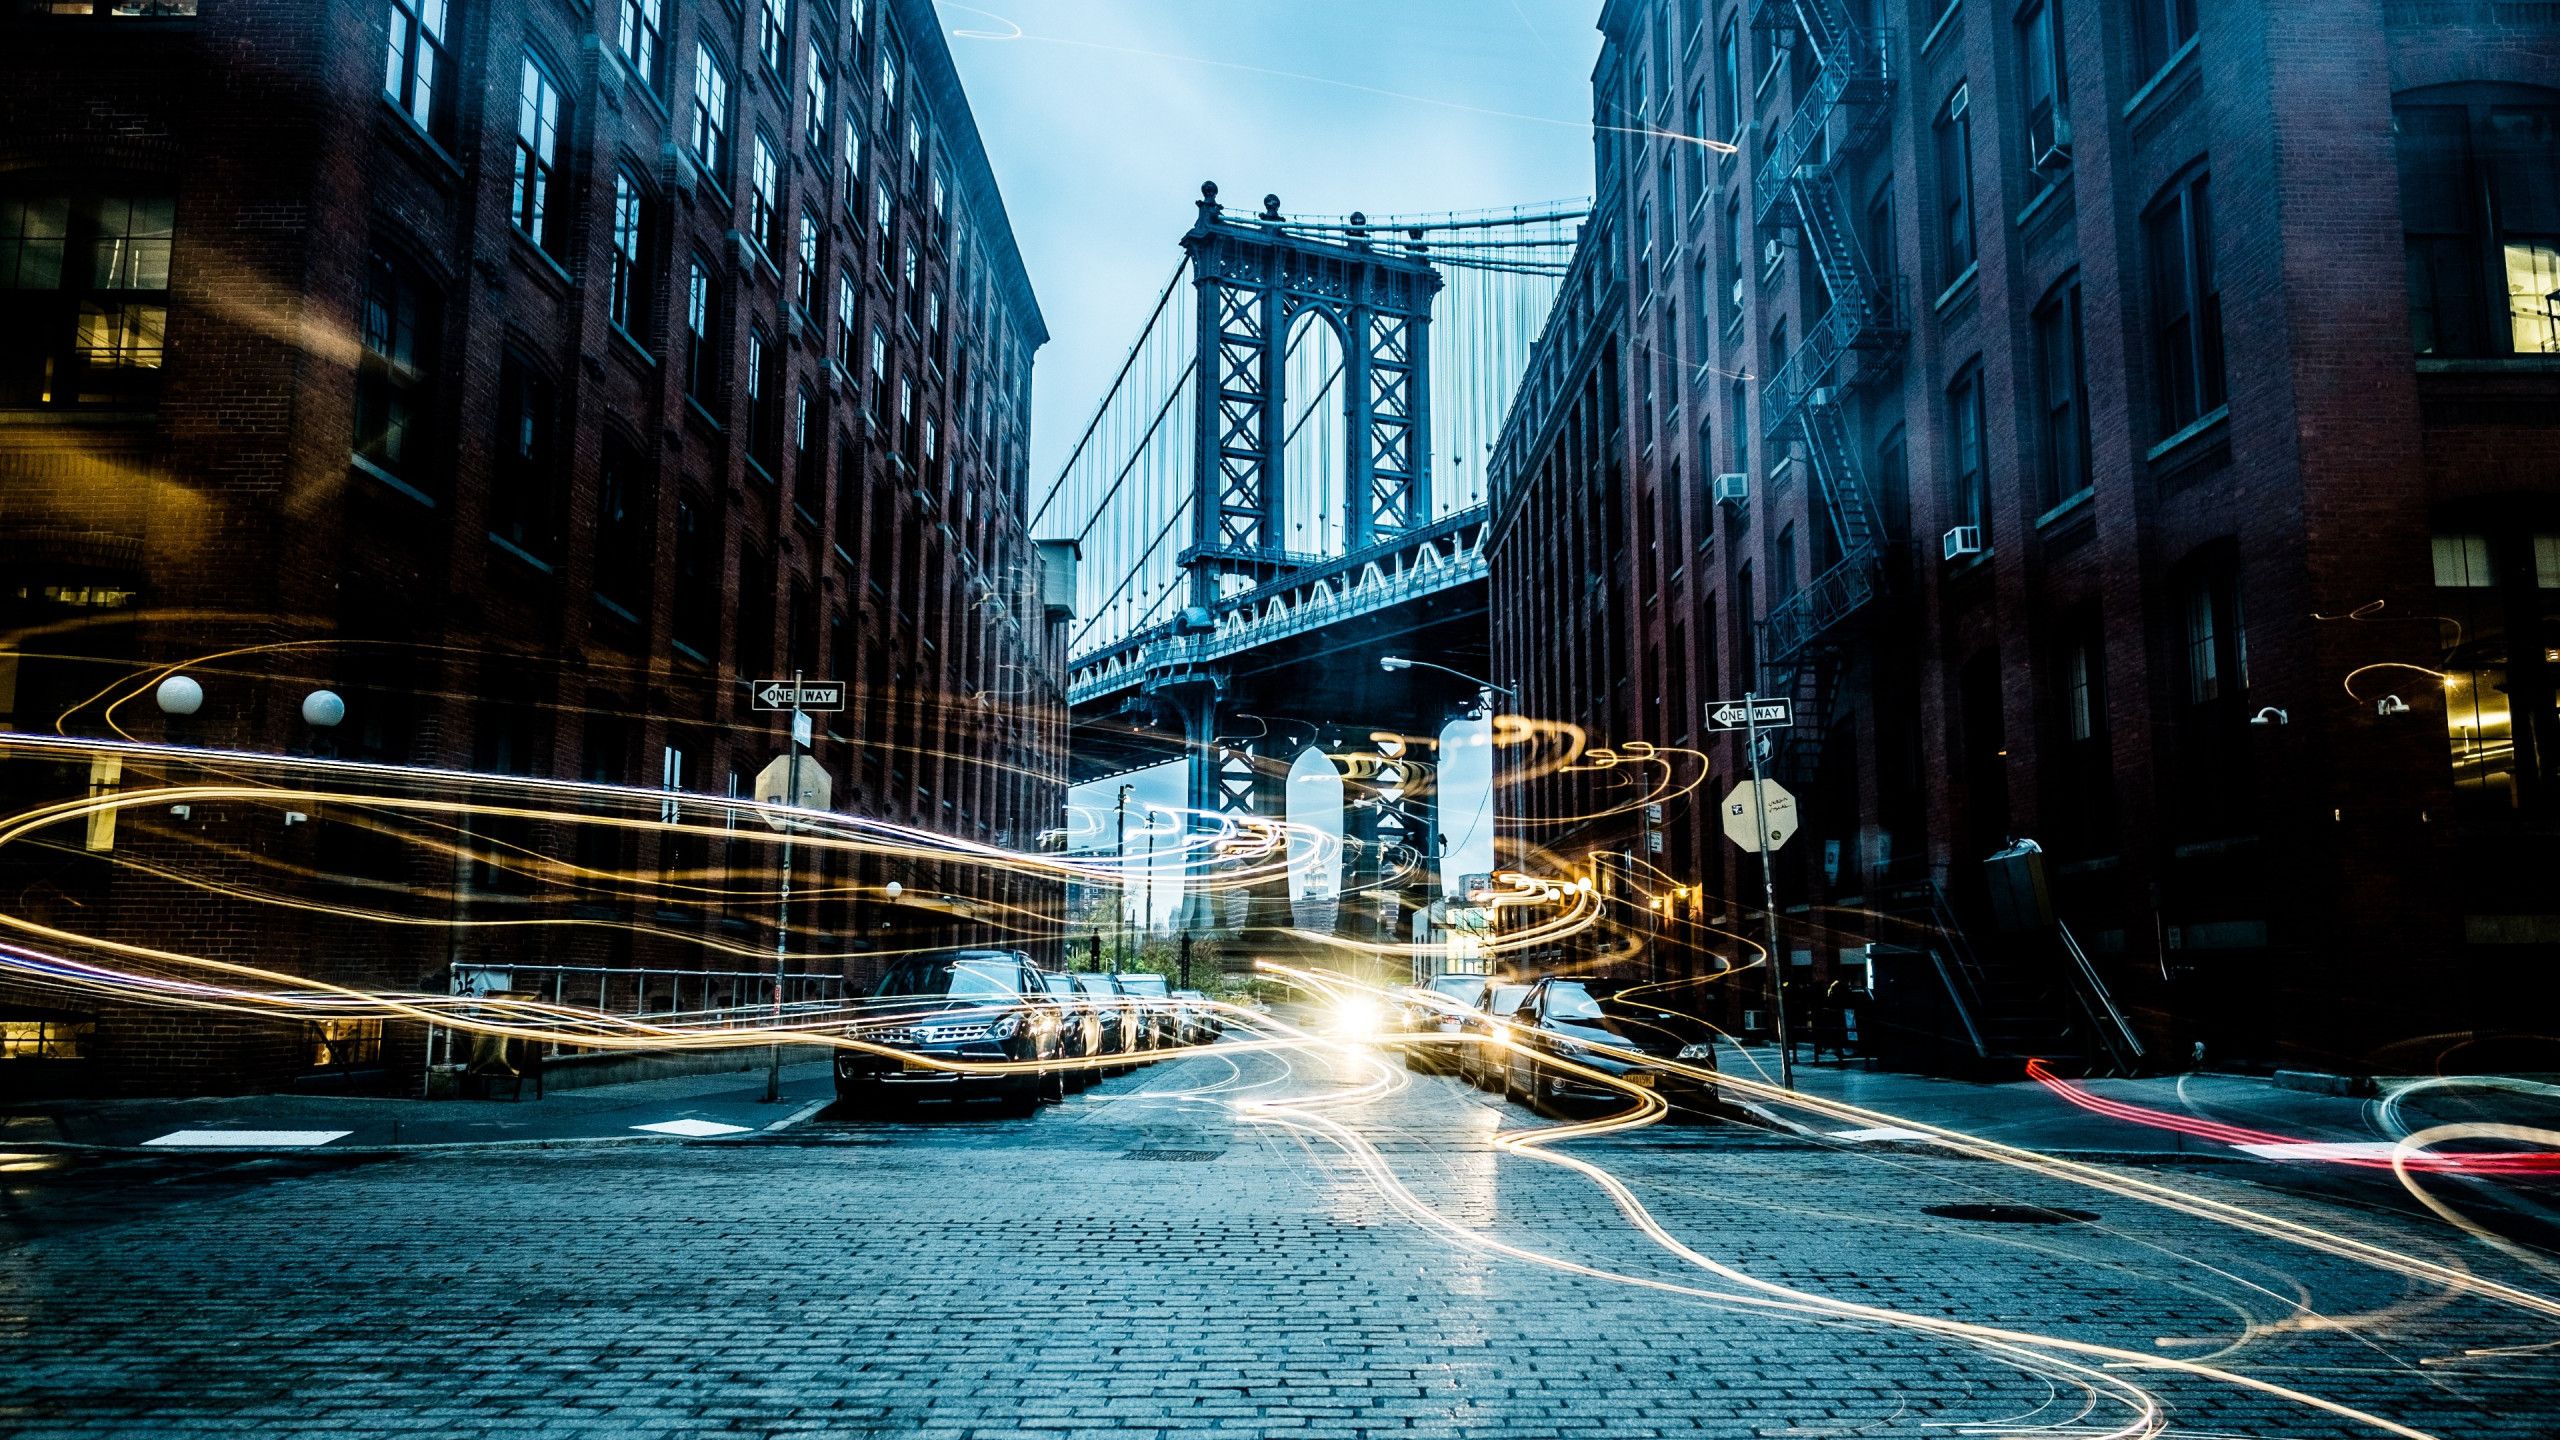 Download wallpaper: Light painting on New York streets 2560x1440